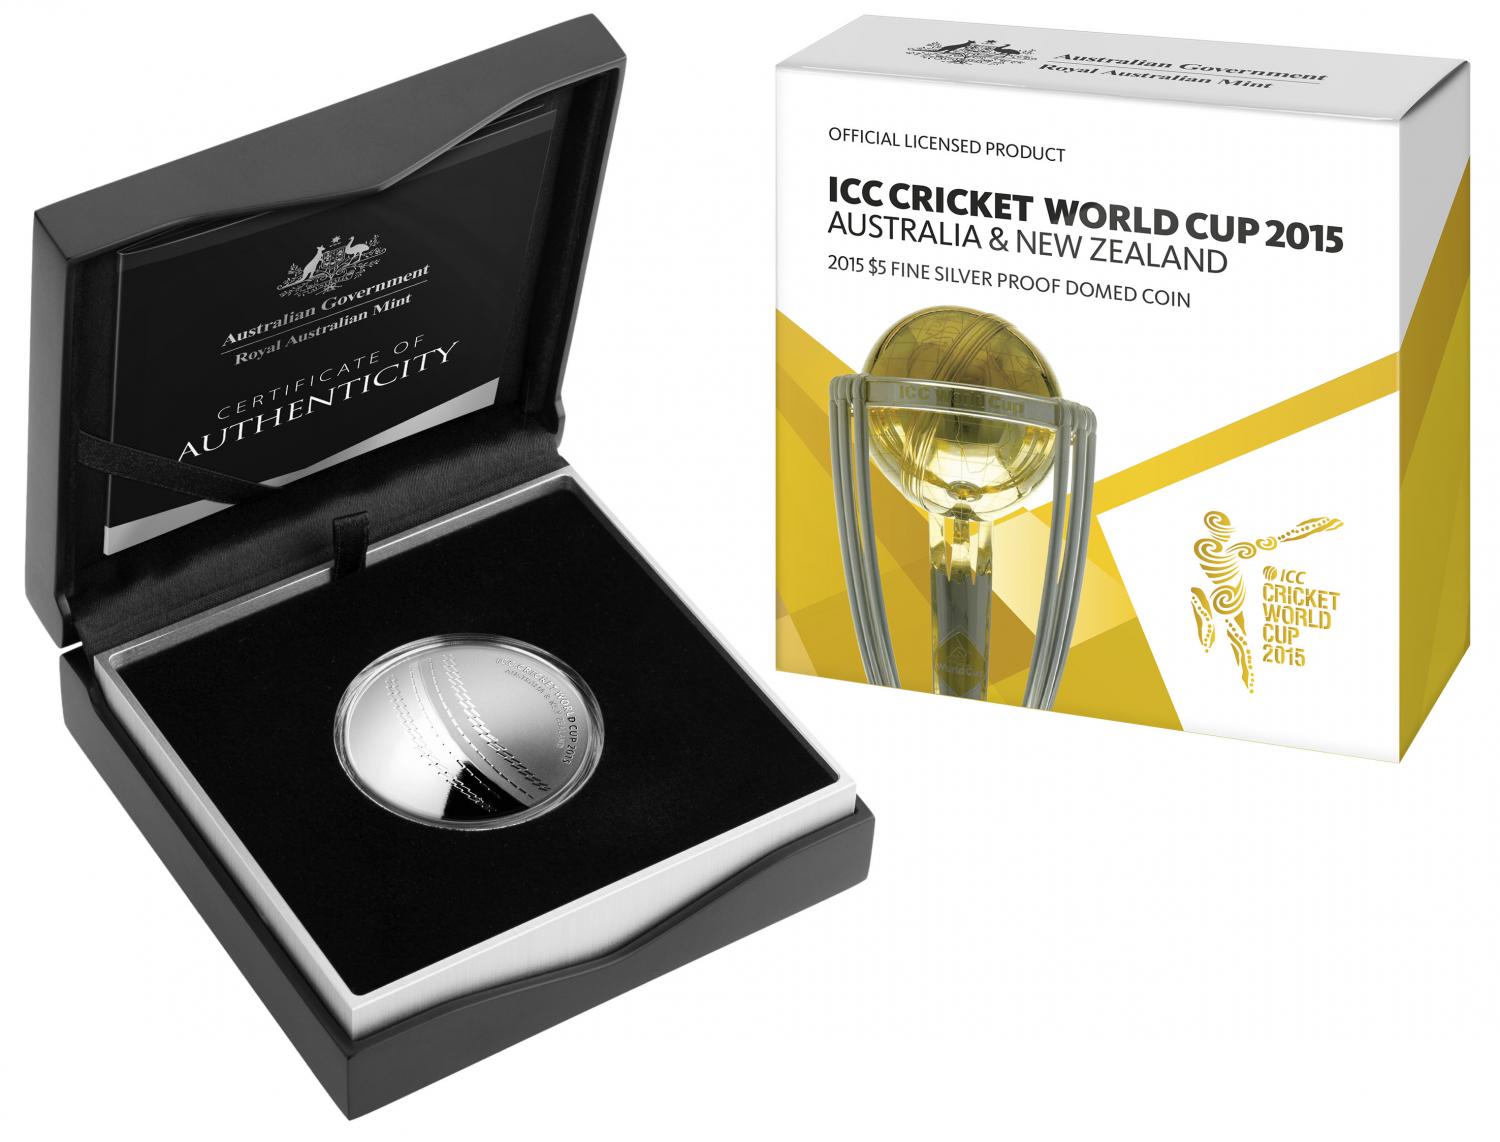 Thumbnail for 2015 ICC Cricket World Cup $5.00 Silver 1oz Proof Domed Coin